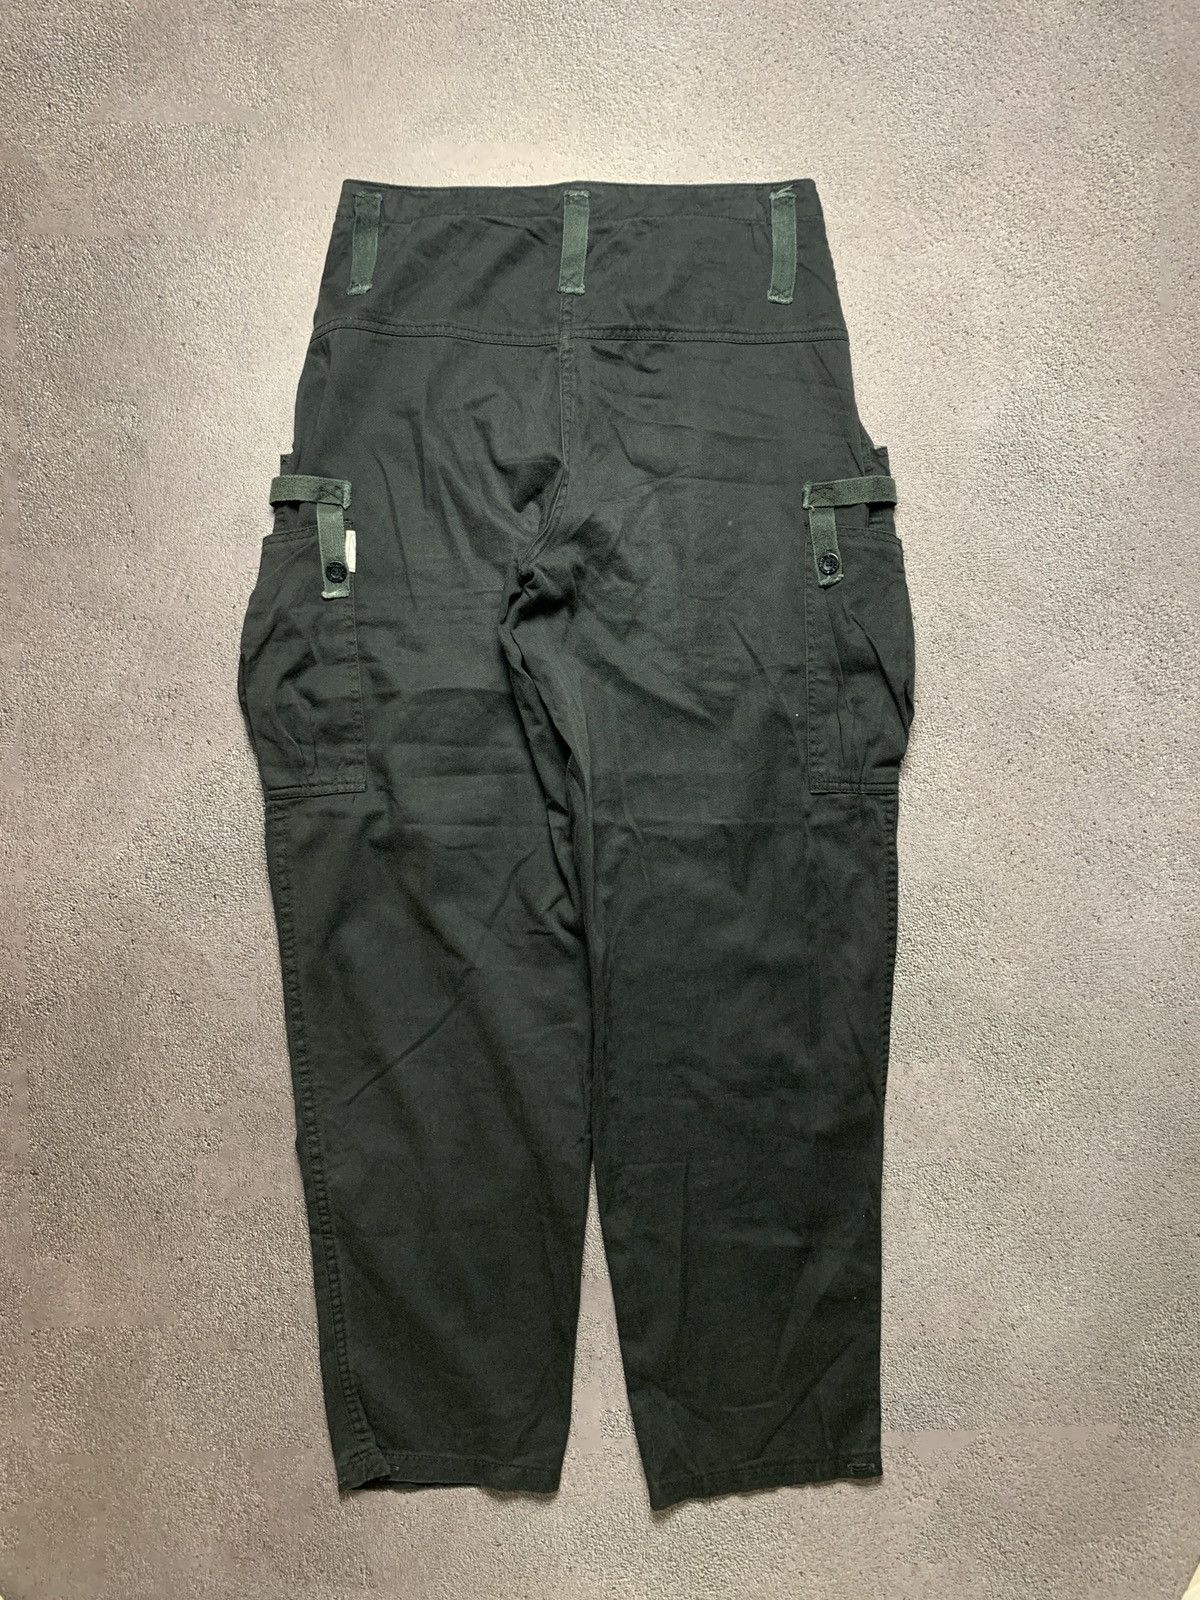 Vintage JAPANESE BRAND MULTIPOCKET CARGO PANTS MILITARY Size US 31 - 14 Preview